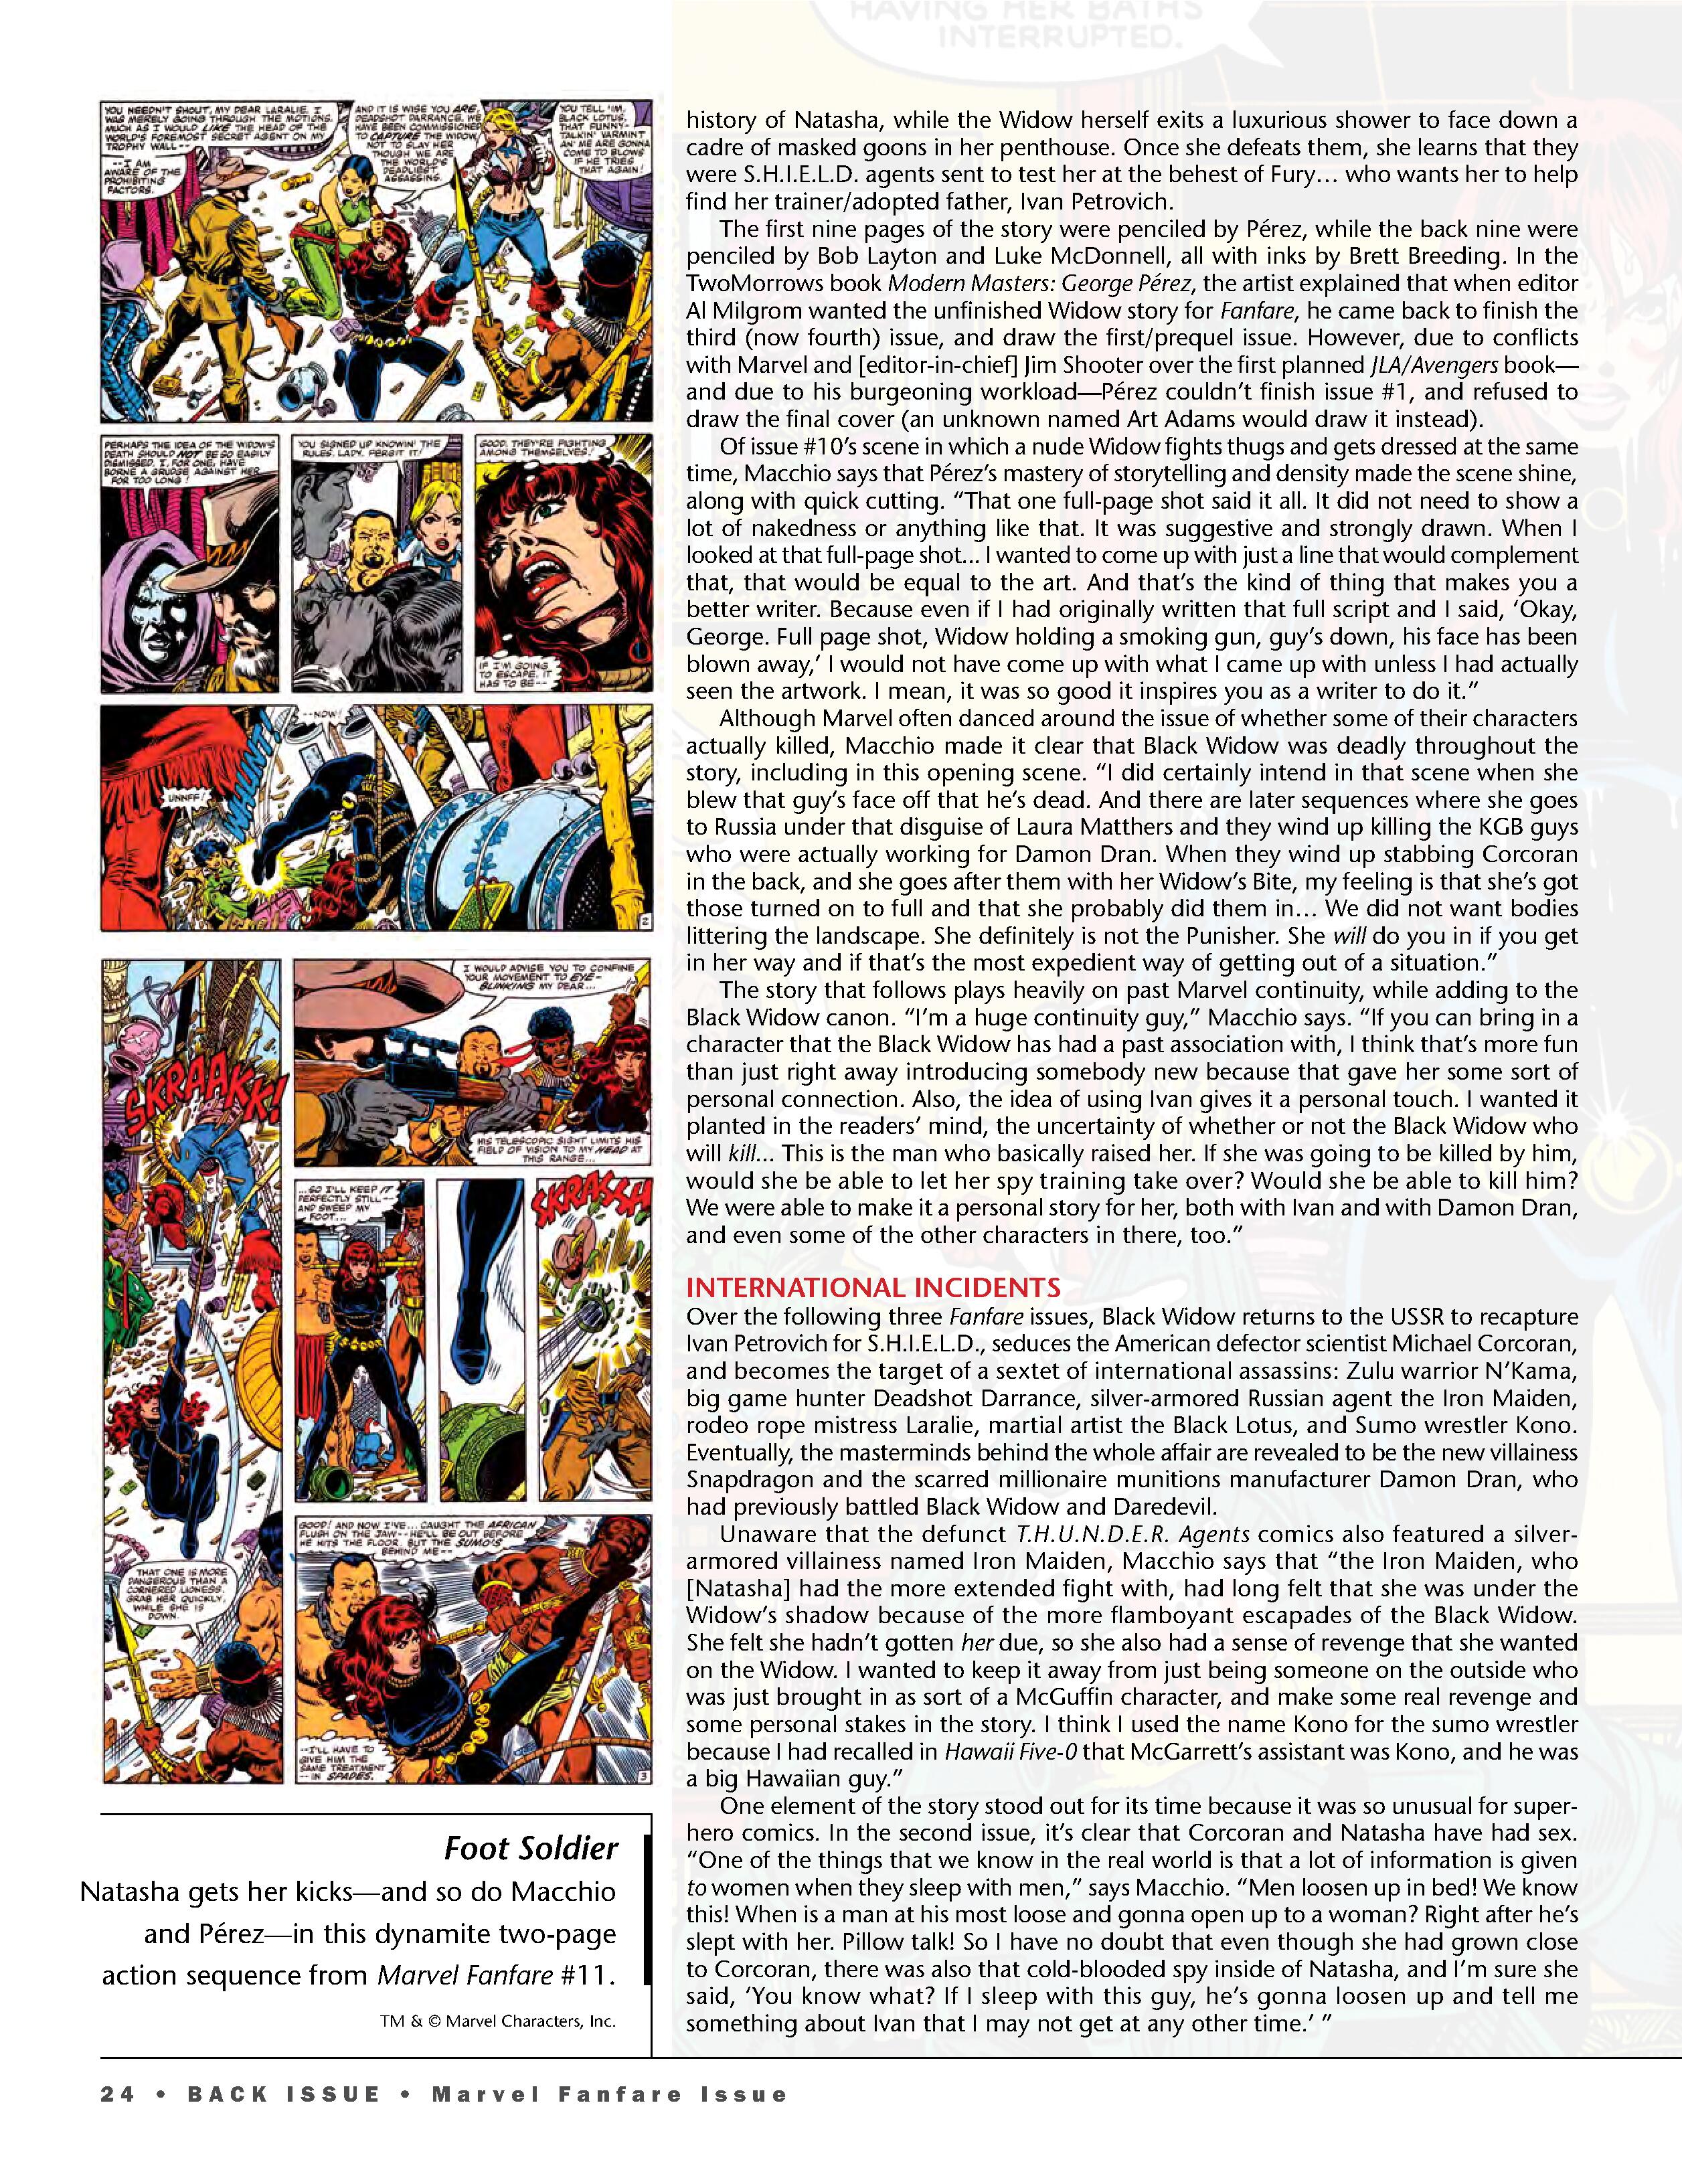 Read online Back Issue comic -  Issue #96 - 26